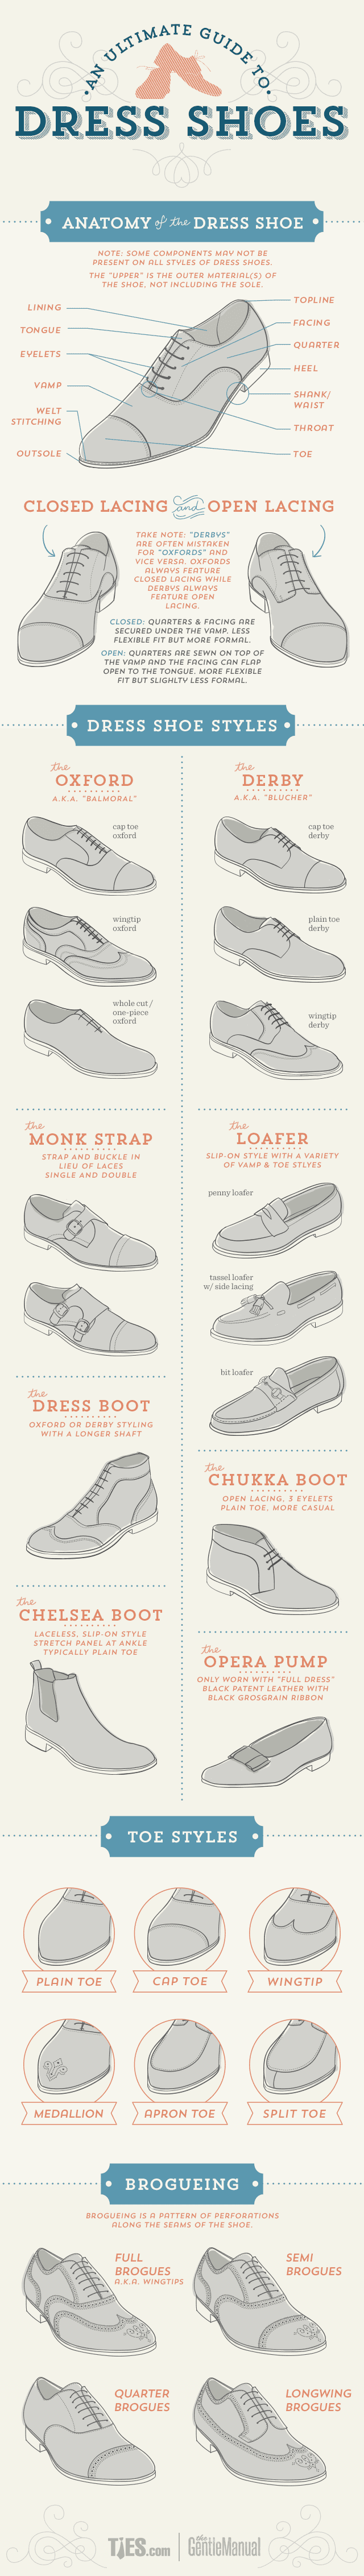 The Ultimate Guide to Dress Shoes